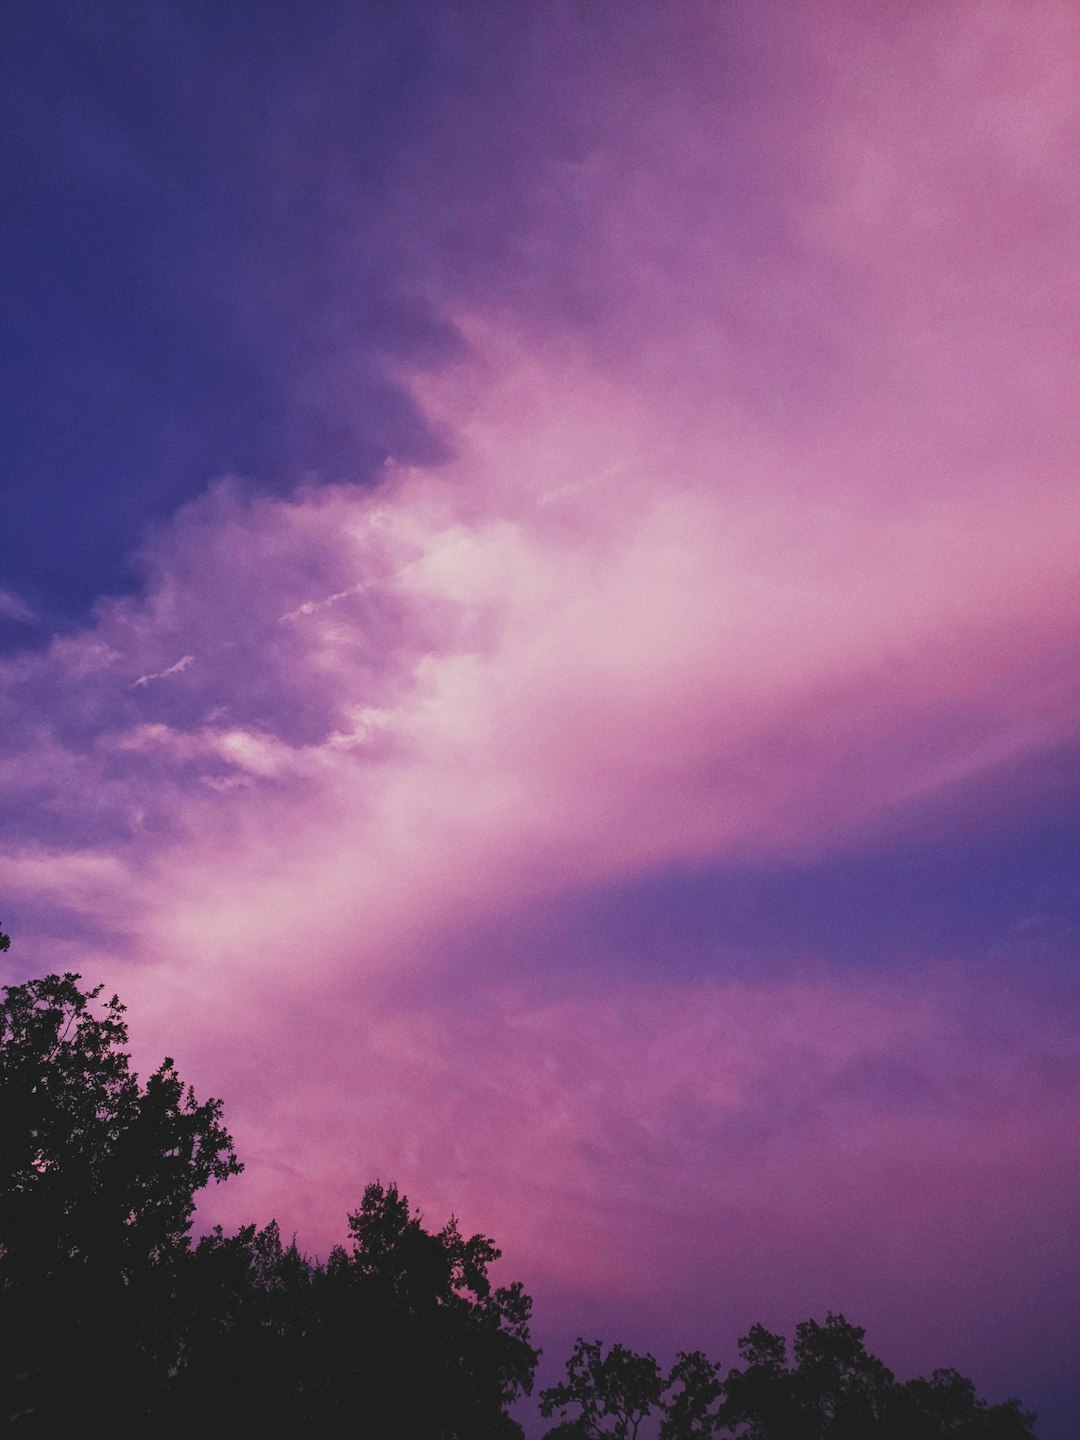 Cotton candy clouds photo by Kyle Wilson (@solidshibe) on Unsplash